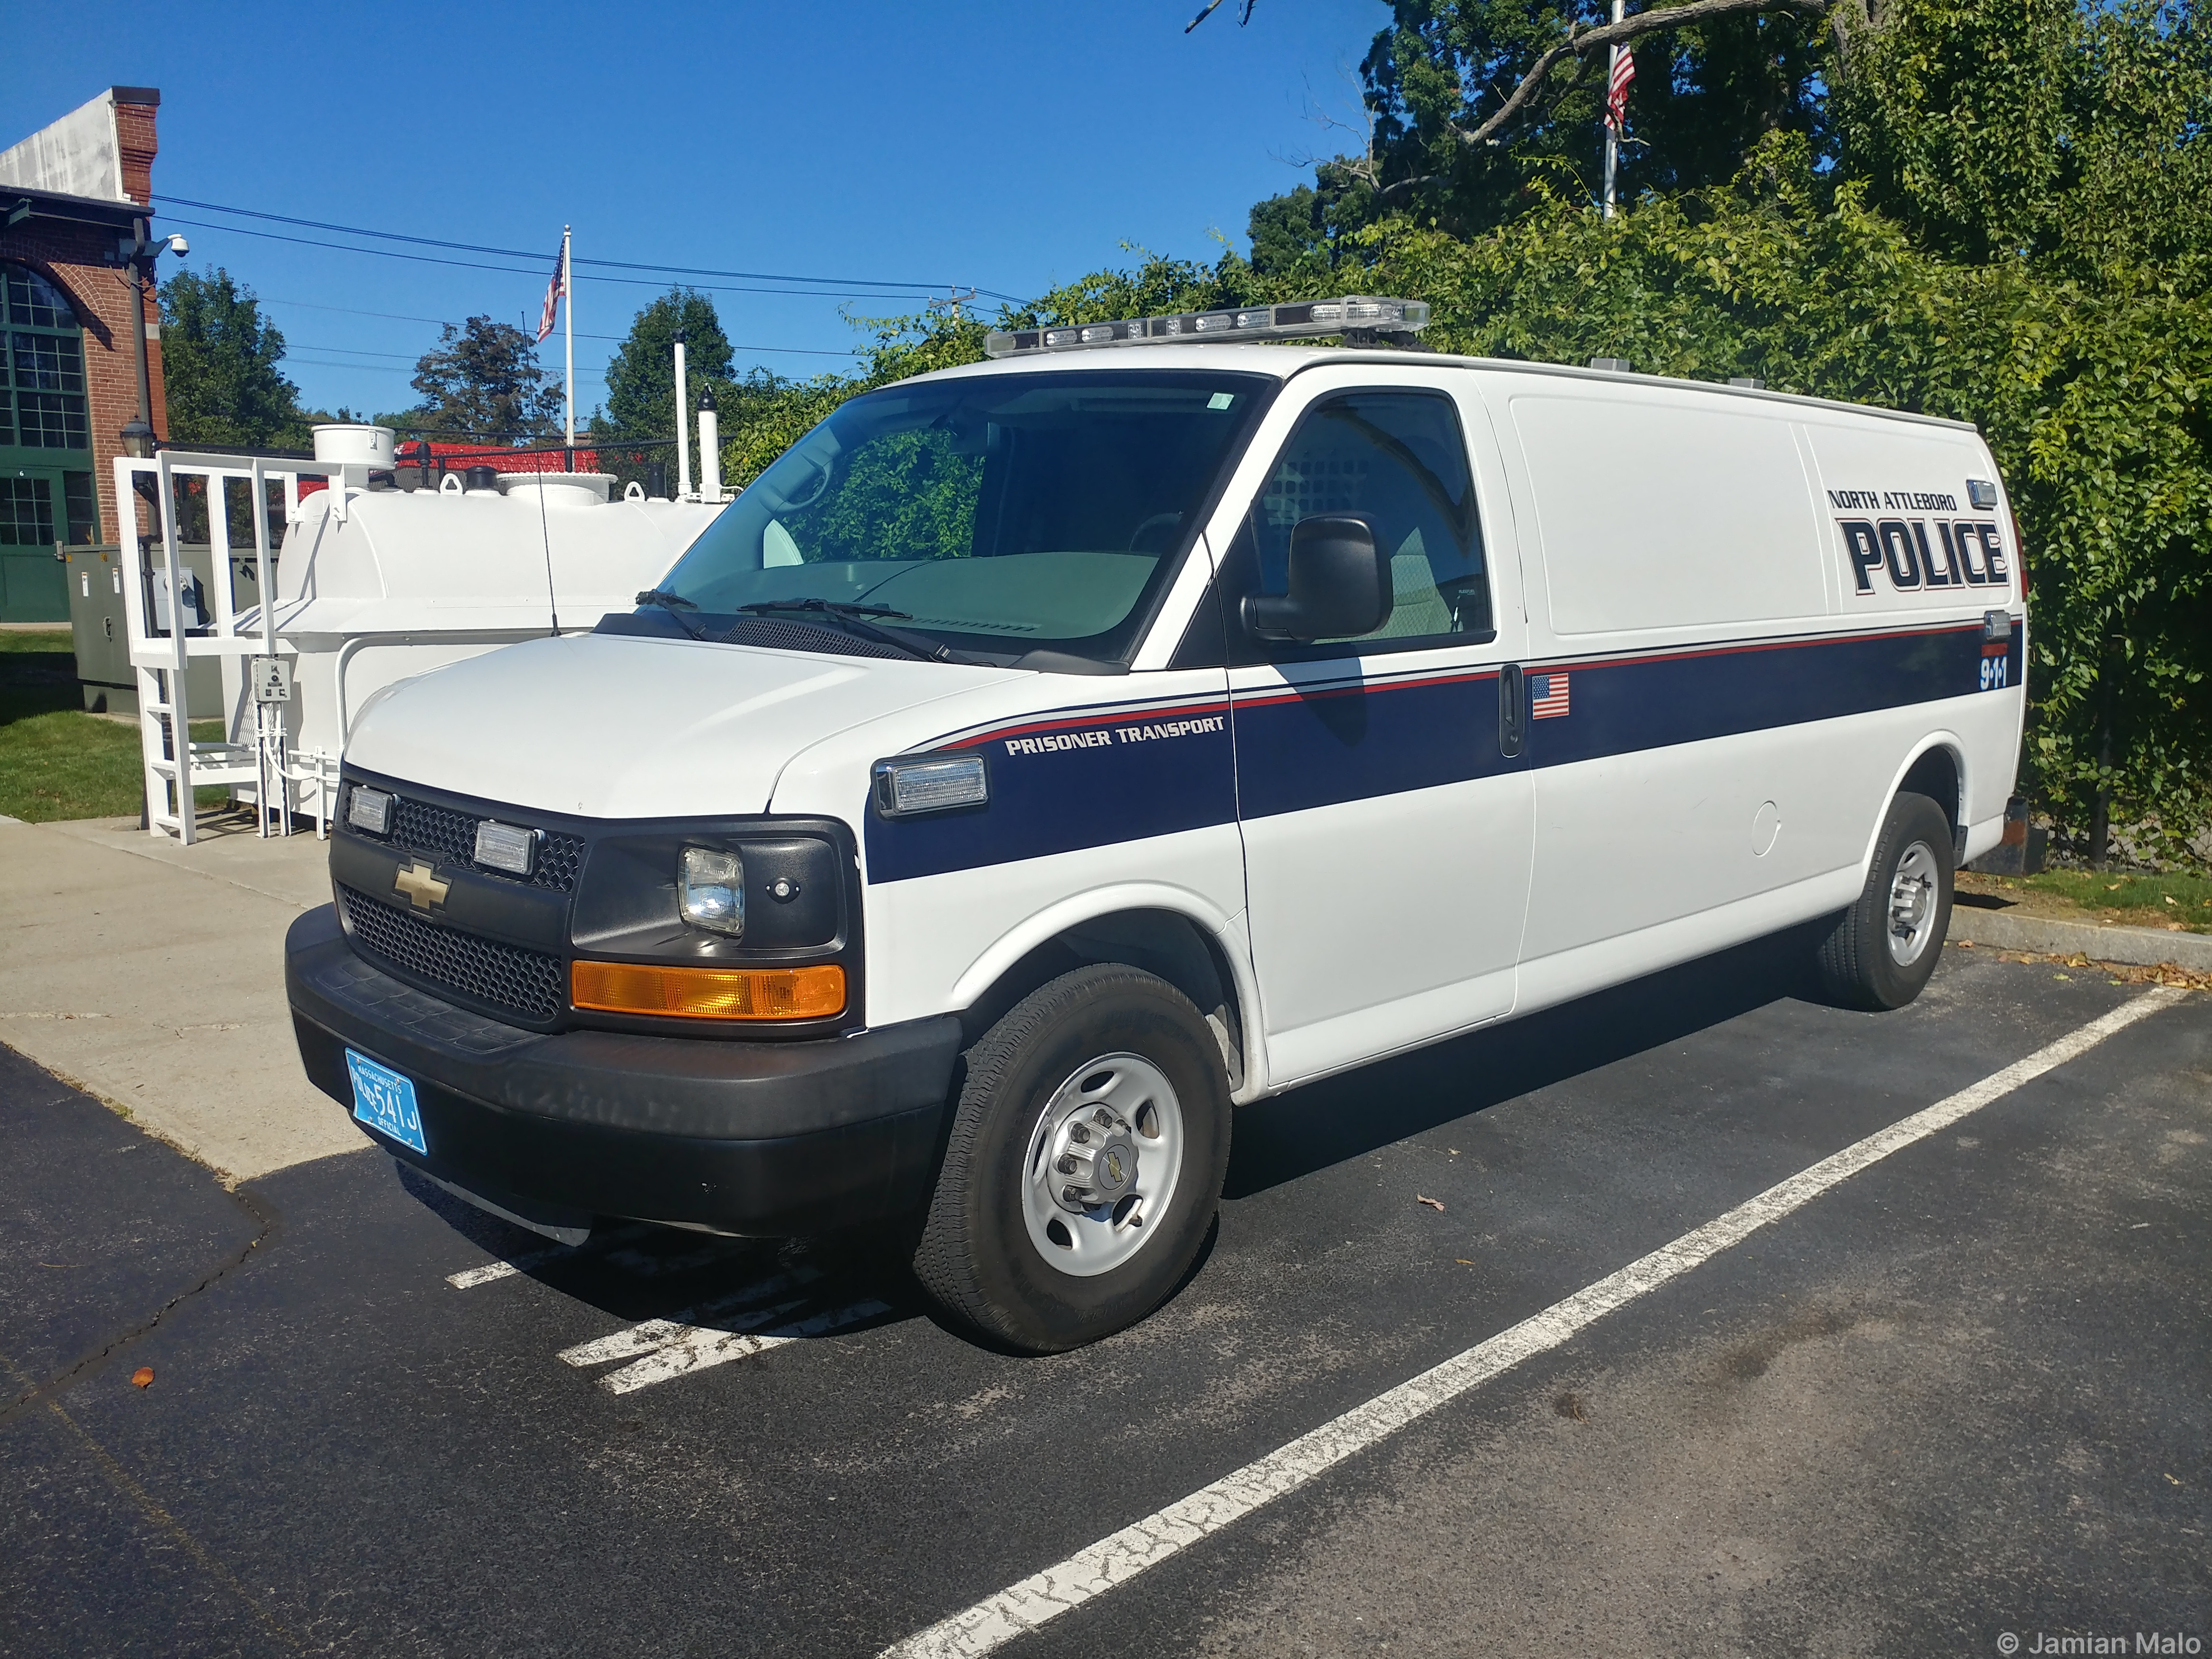 A photo  of North Attleborough Police
            Prisoner Transport Unit, a 2014 Chevrolet Express             taken by Jamian Malo